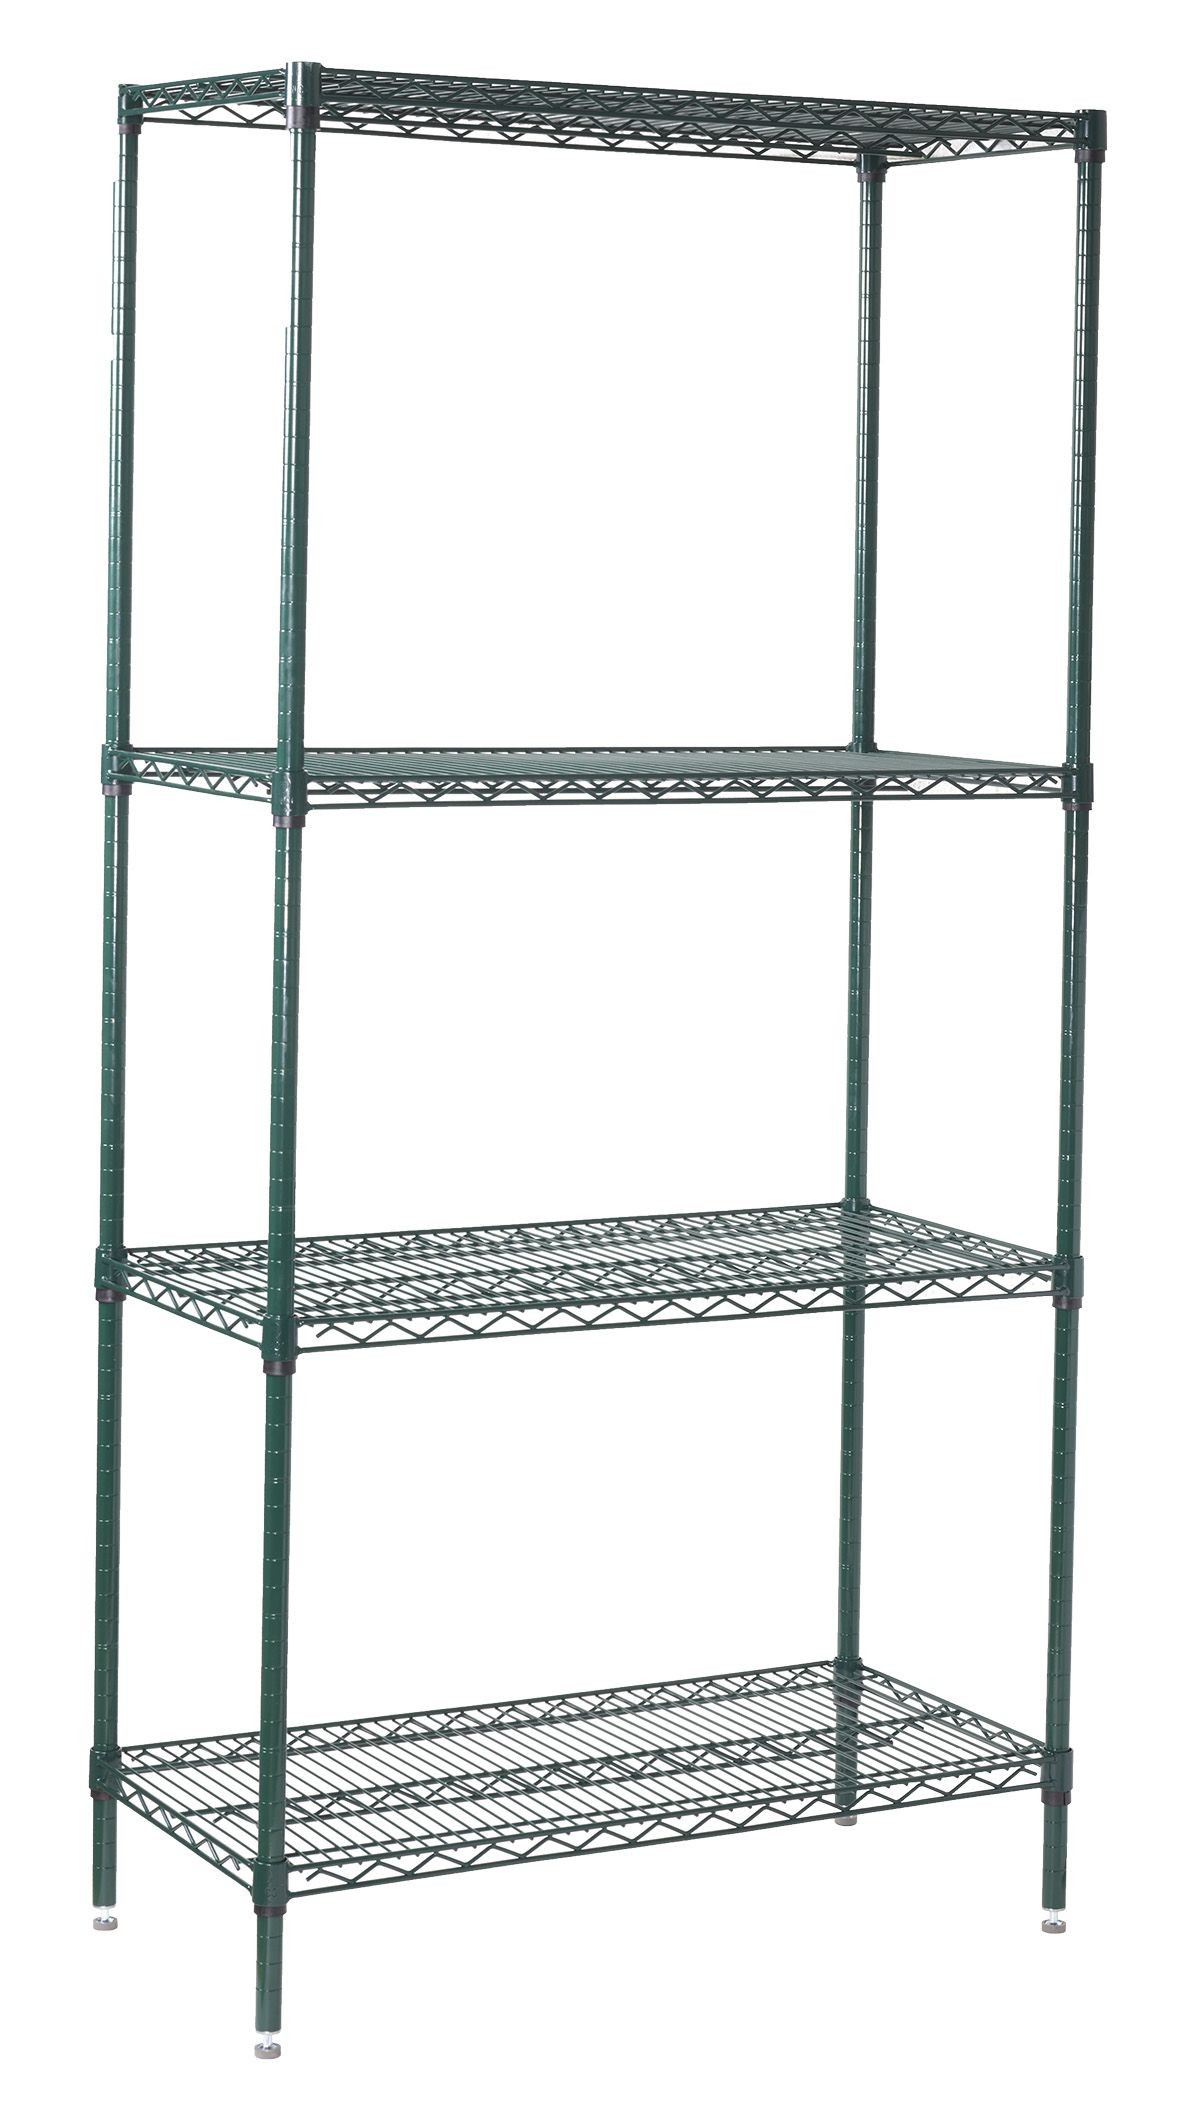 Winco VEXS-1848 Epoxy Coated 4-Tier Wire Shelving Set, 18" x 48" x 72"